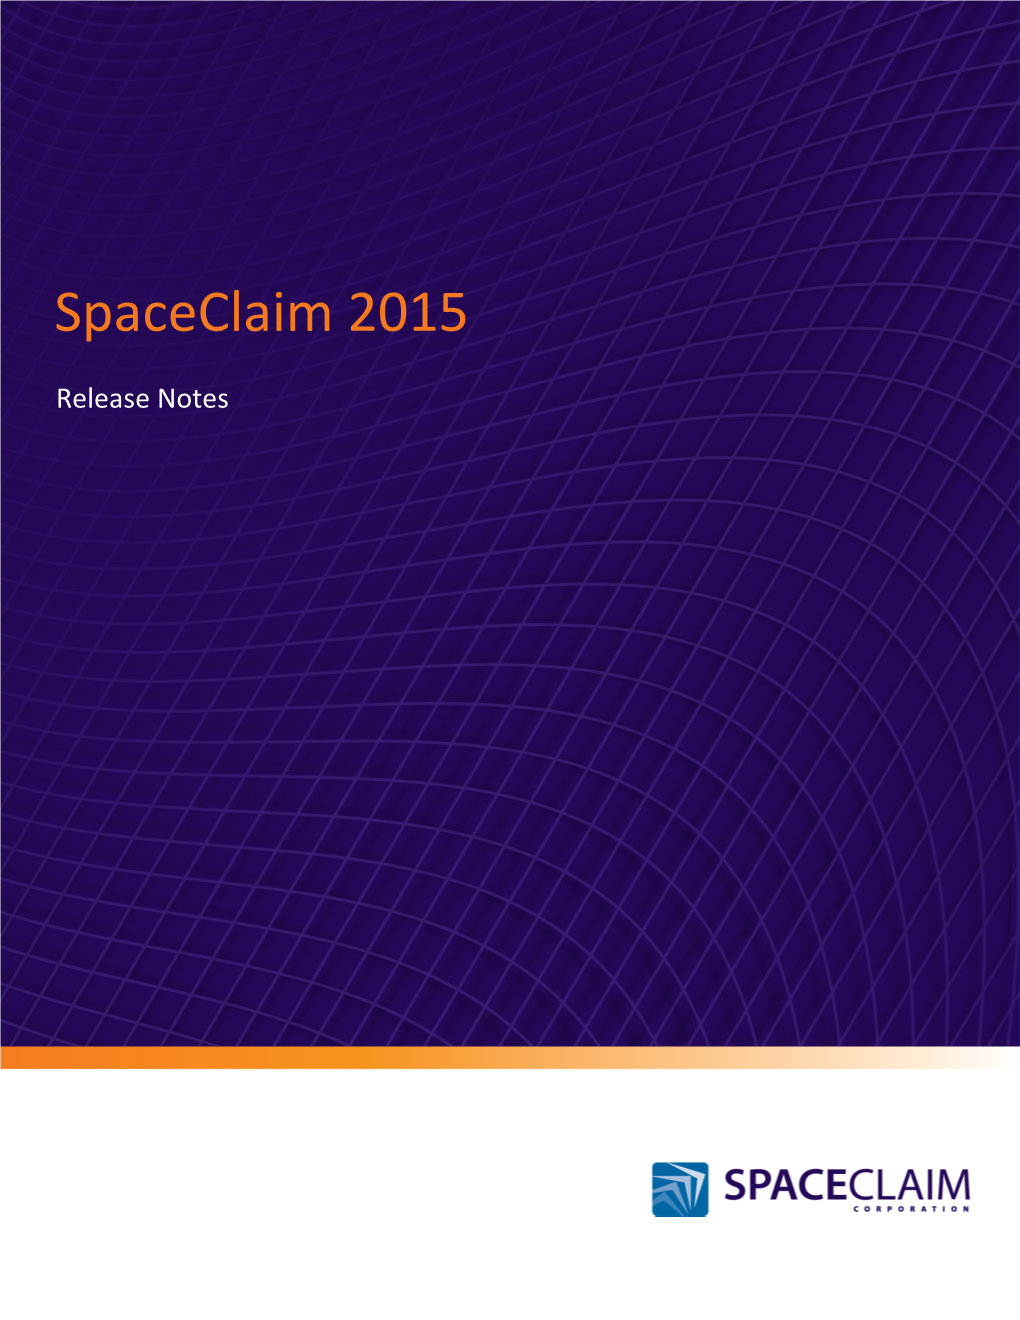 Spaceclaim 2015 Release Notes